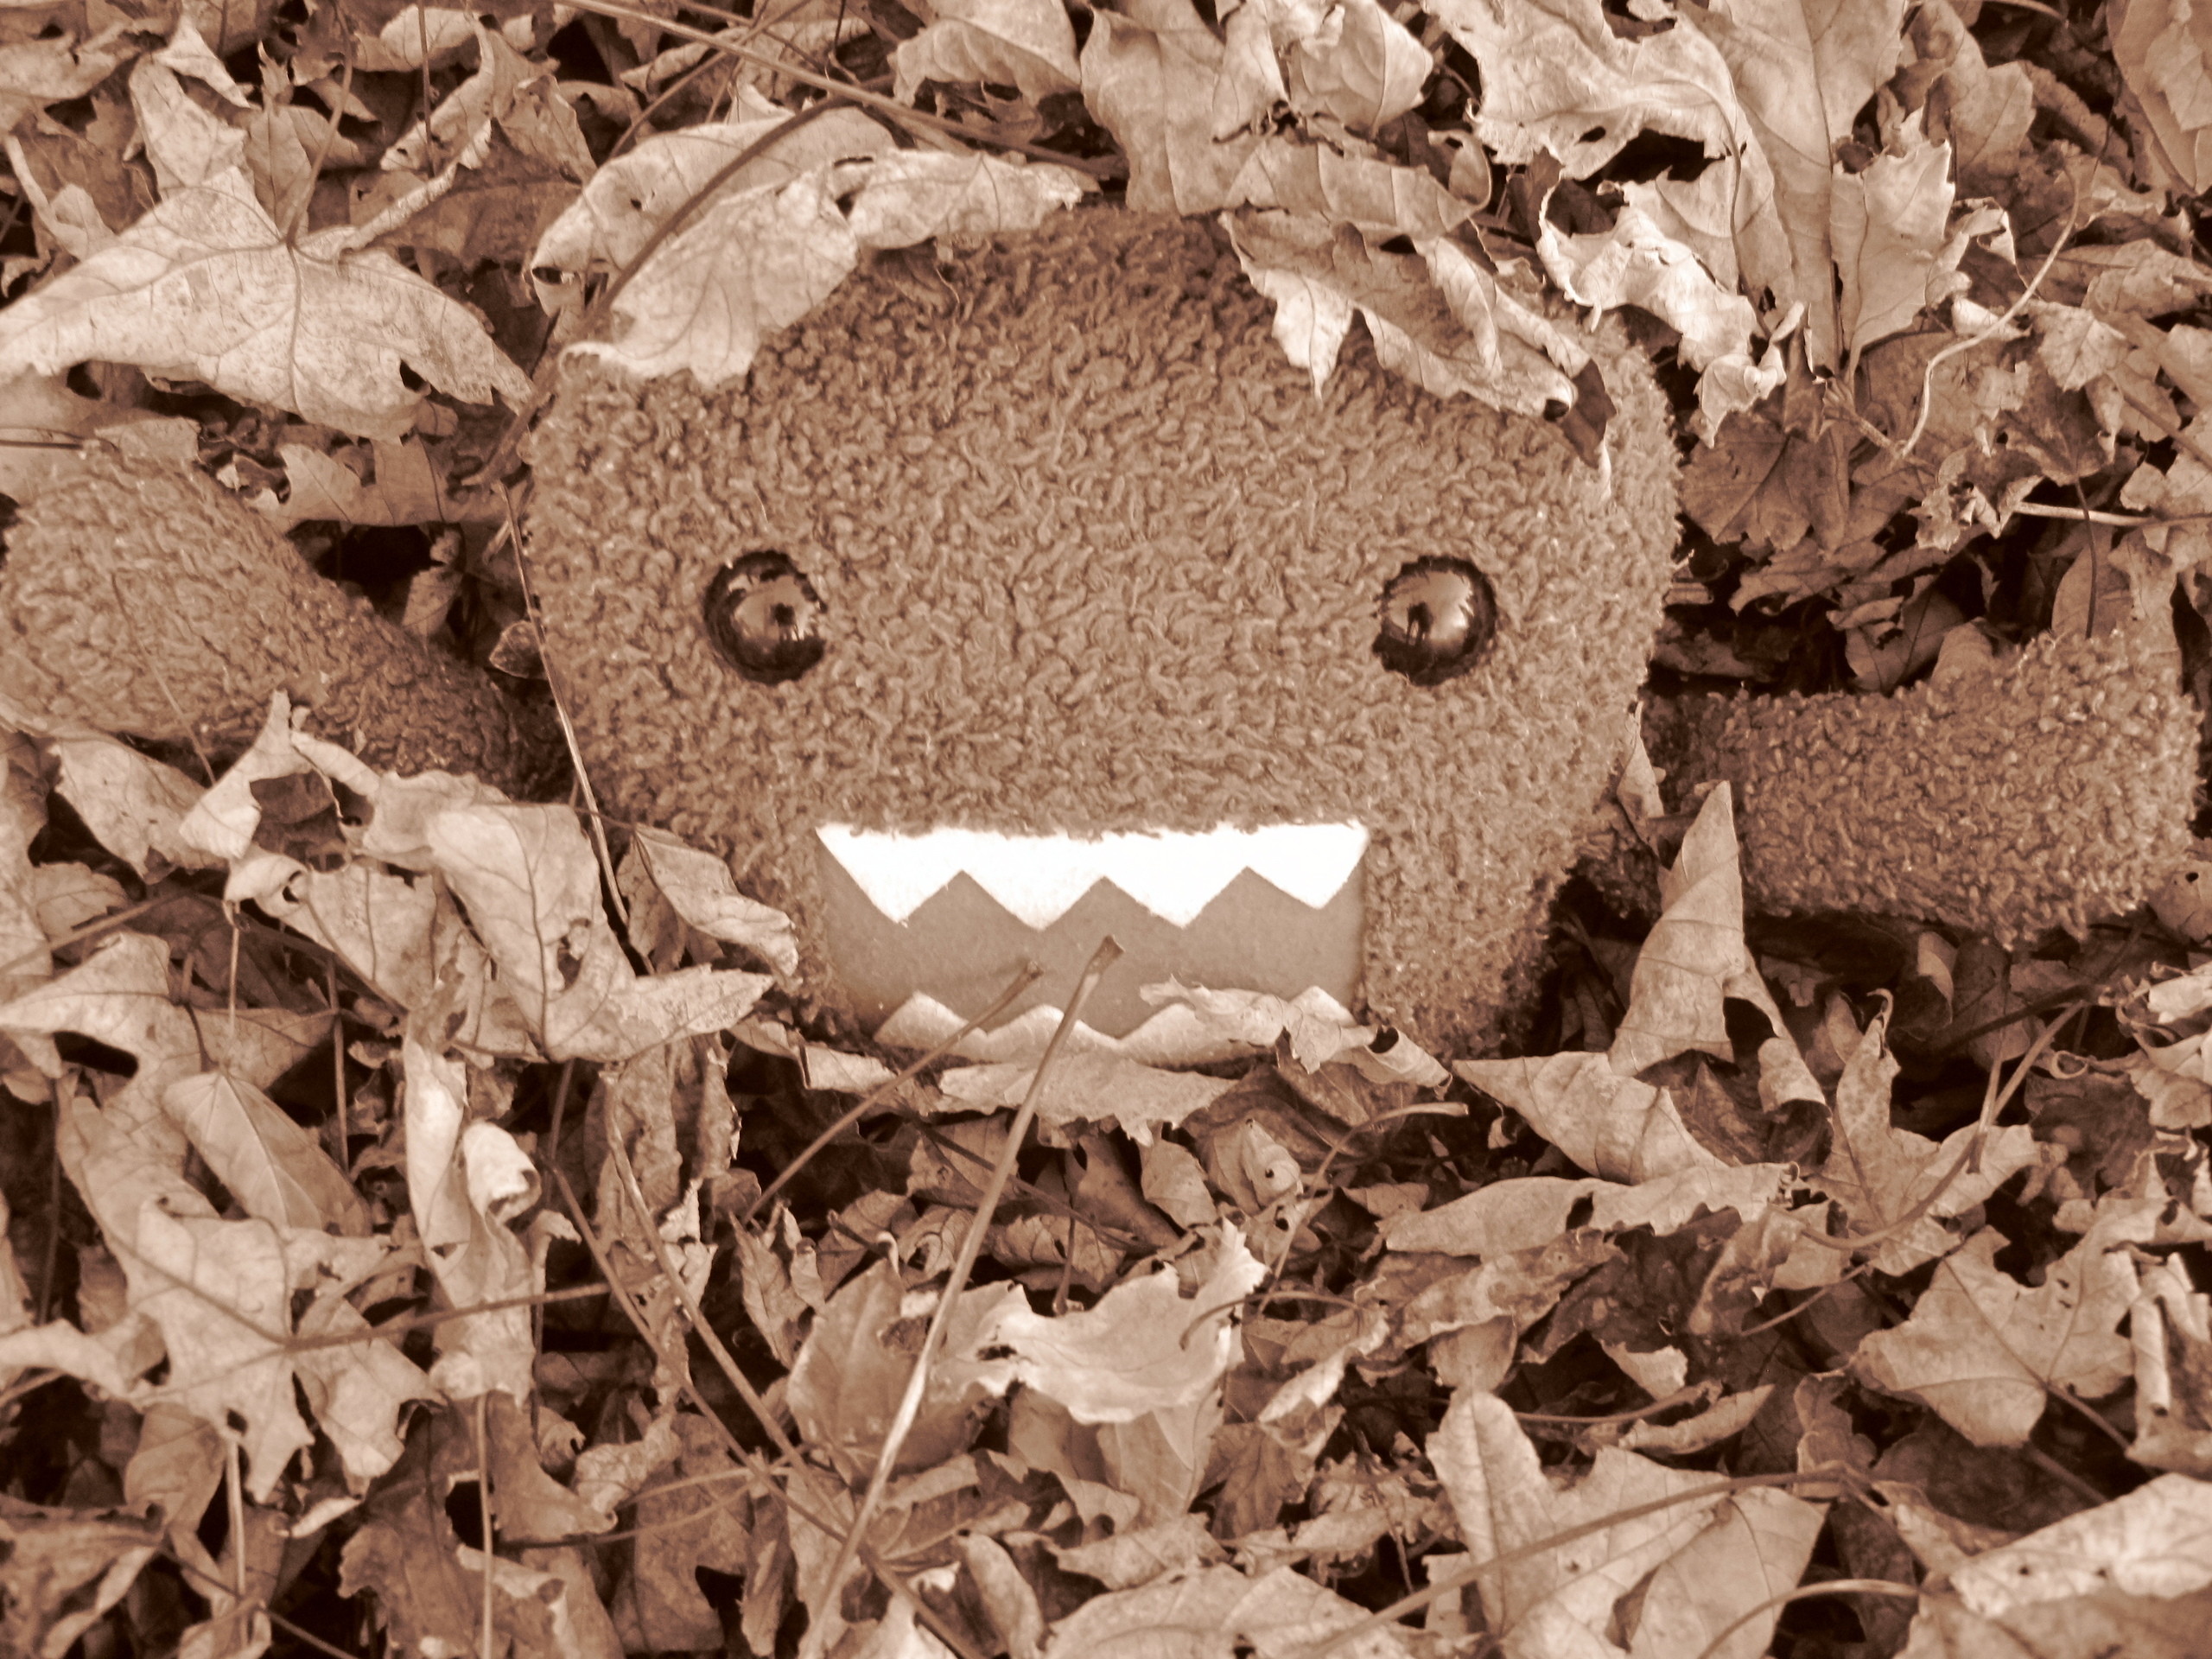 2560x1920 Domo images Domo's first leaf pile HD wallpaper and background photos